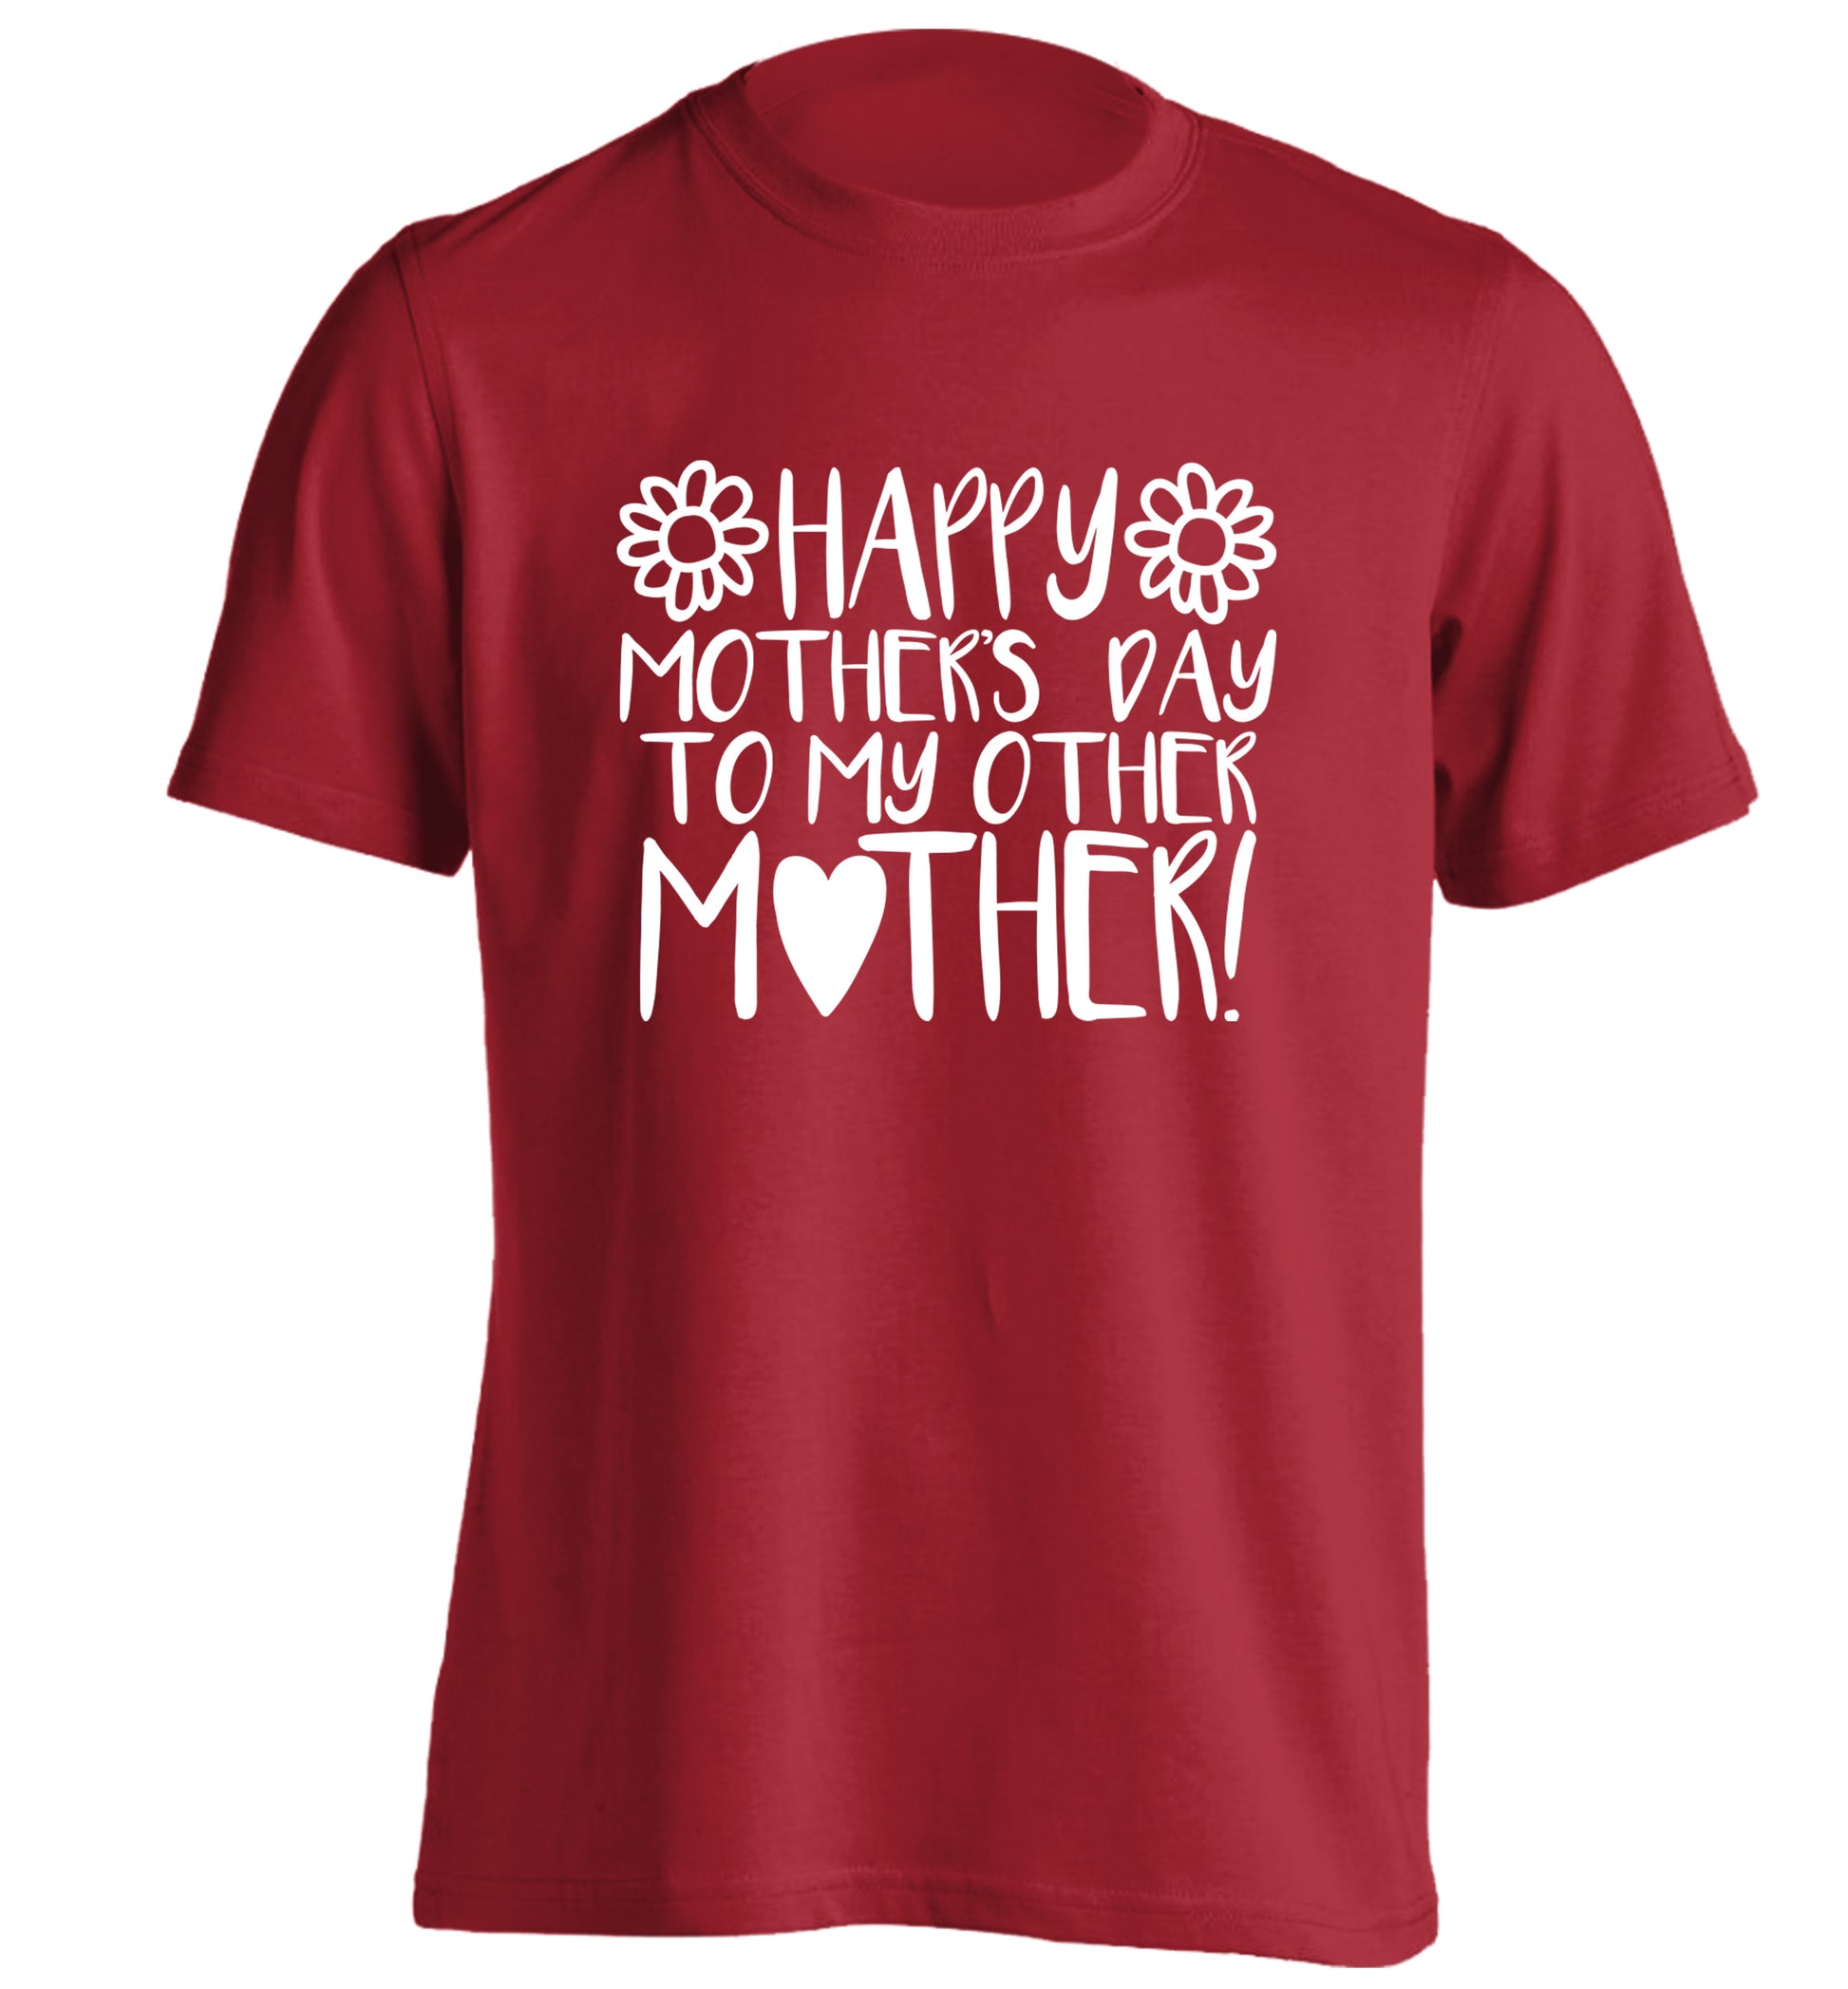 Happy mother's day to my other mother adults unisex red Tshirt 2XL